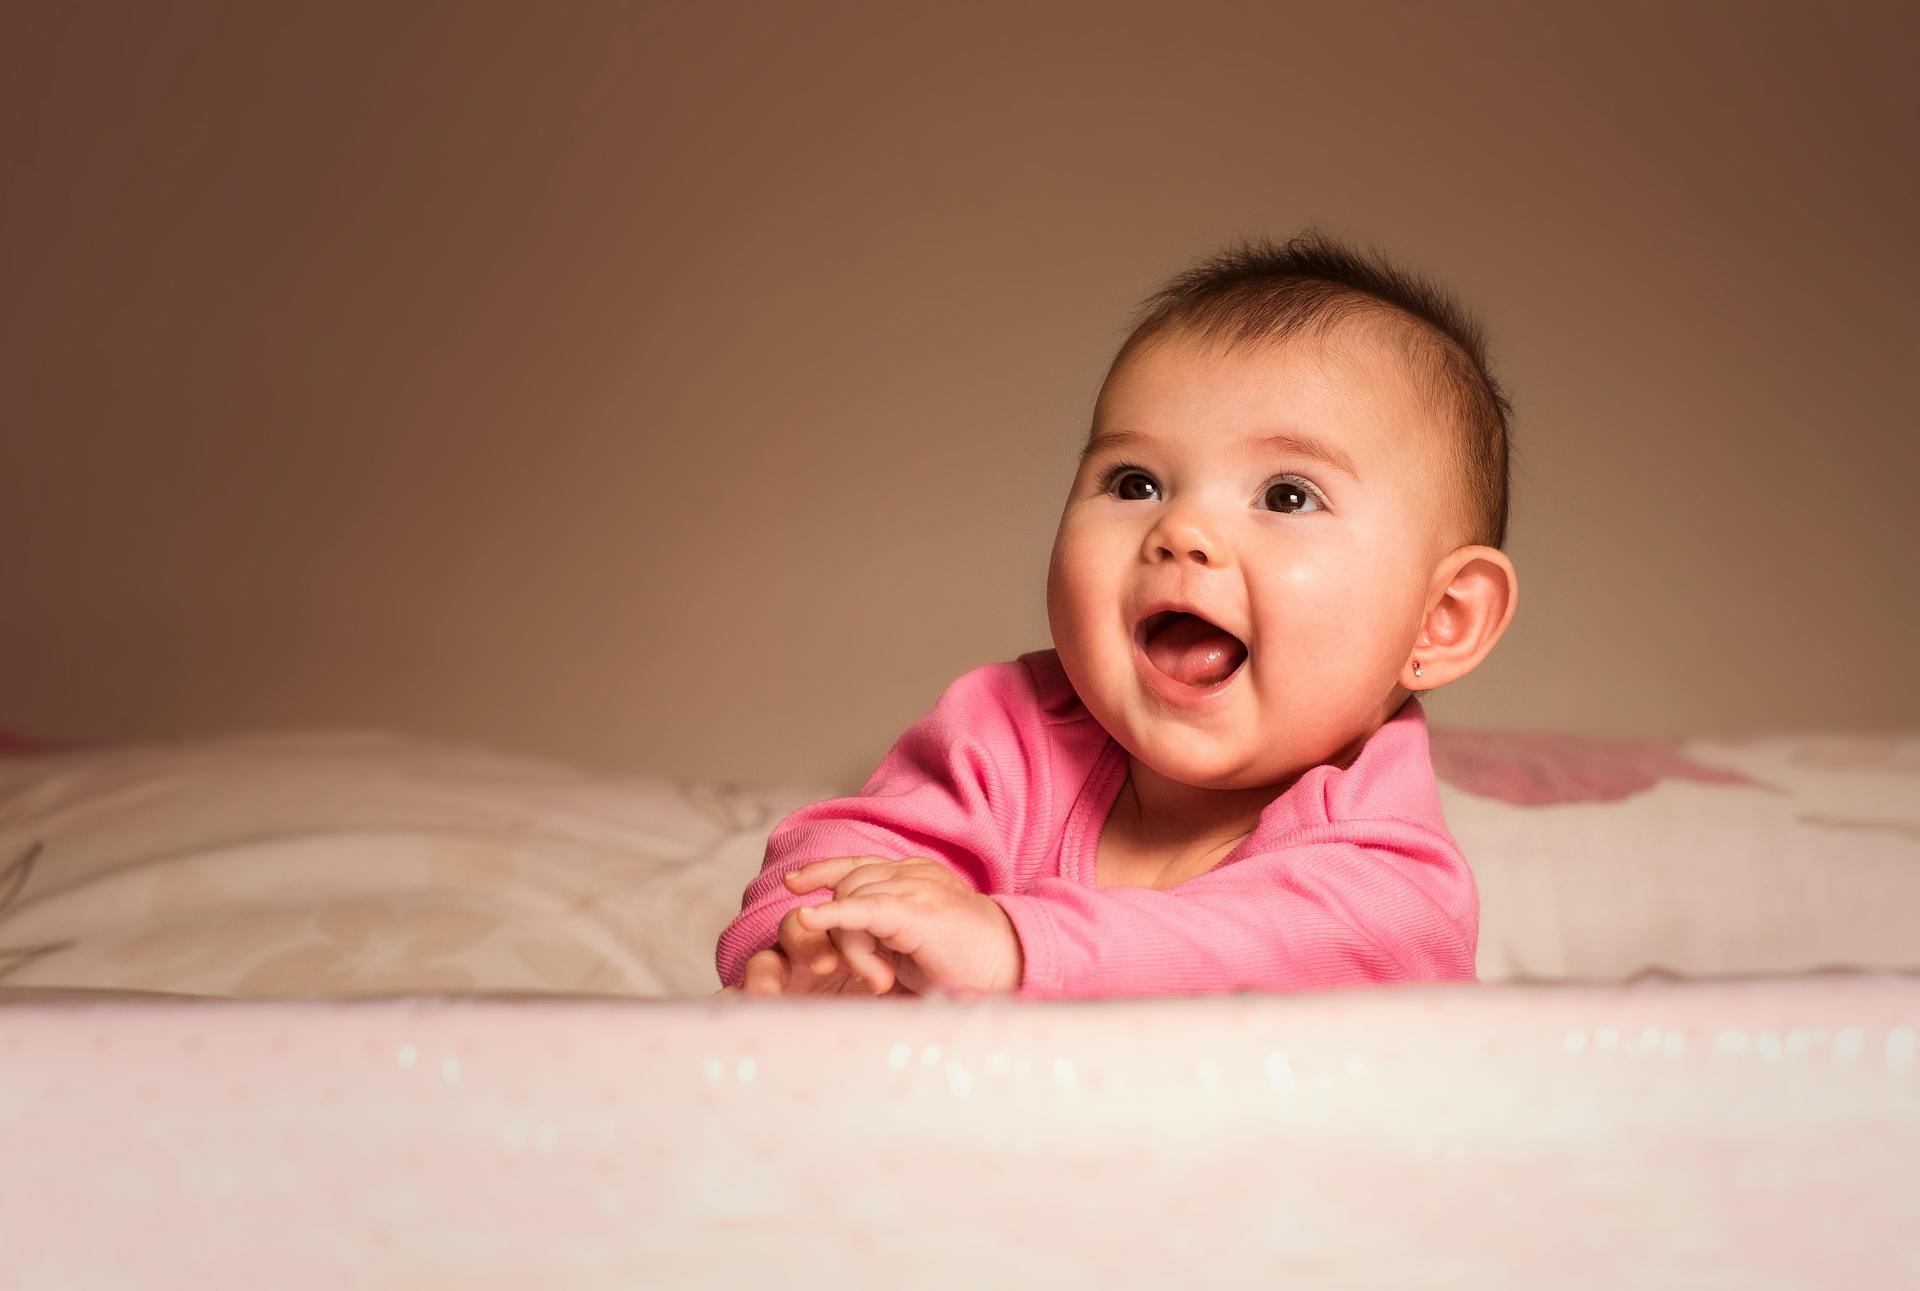 A smiling baby | Source: Pexels